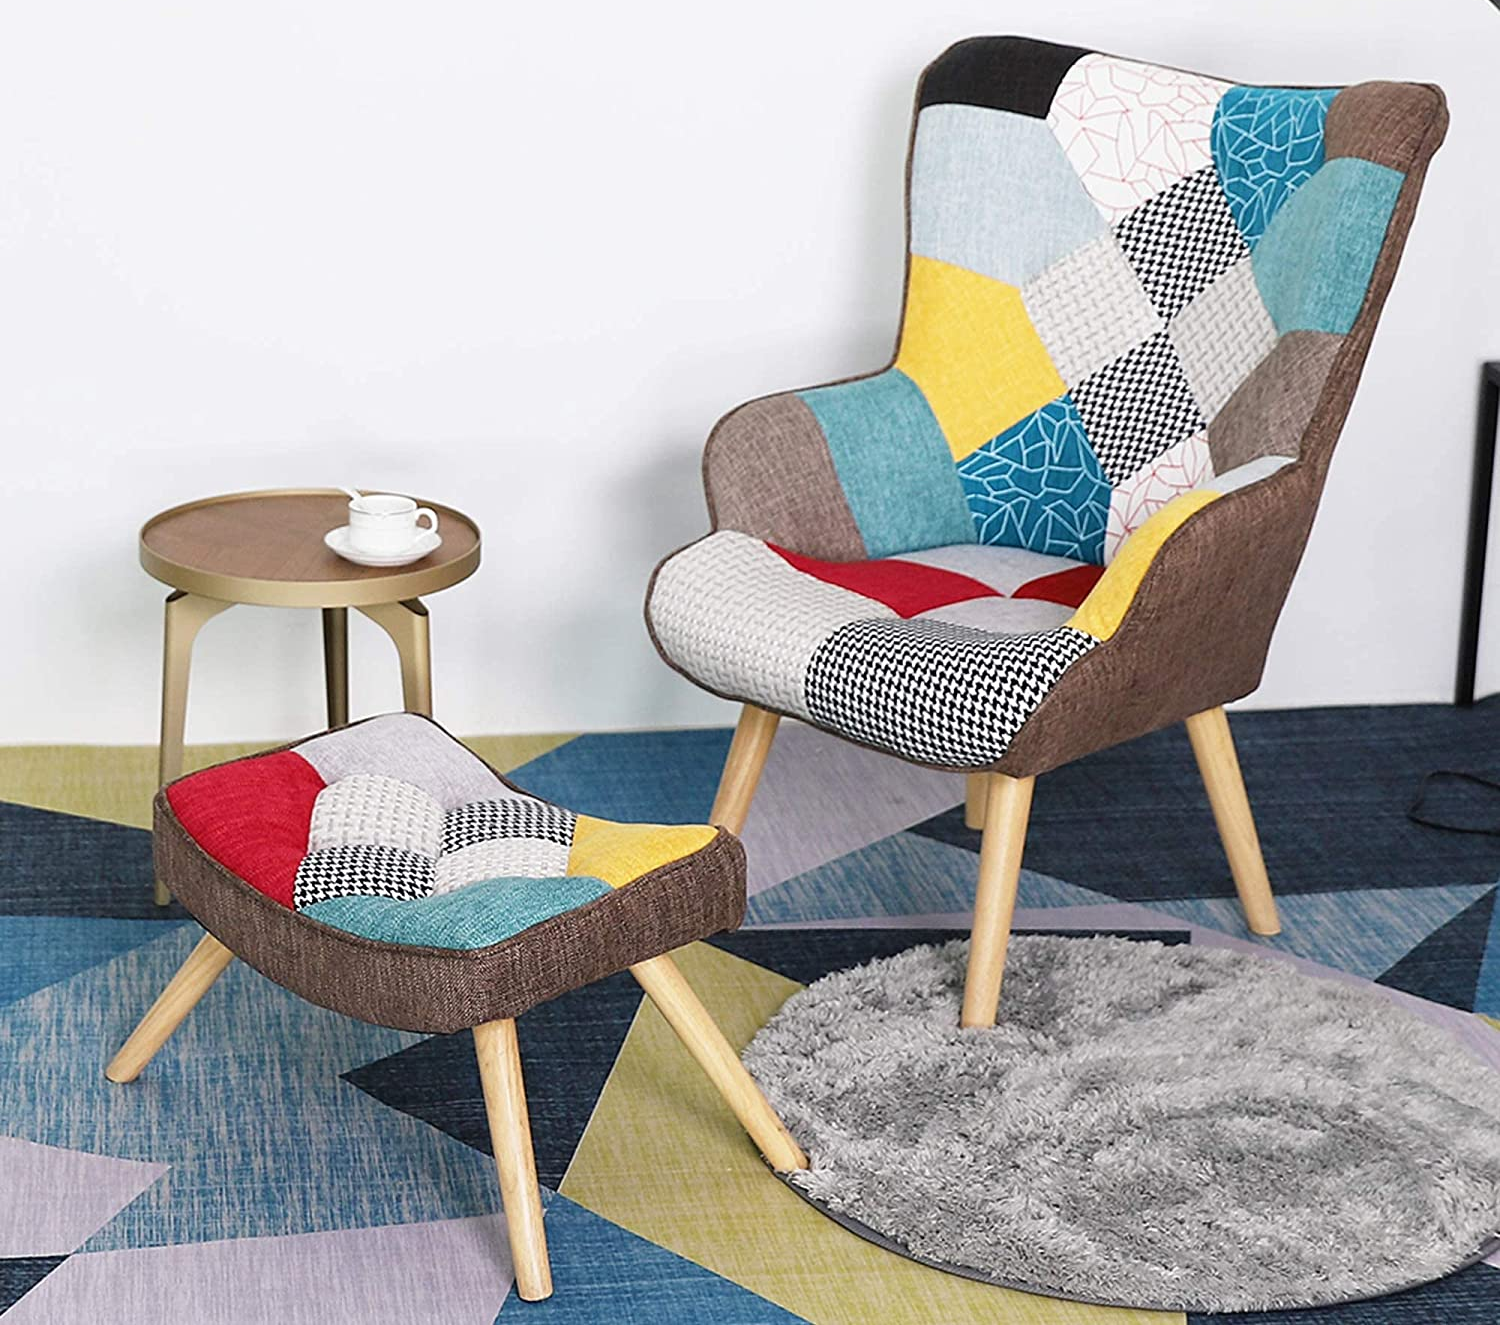 a chair and ottoman set with a patchwork design with shades of red, blue, and yellow contrasted against neutral patterns